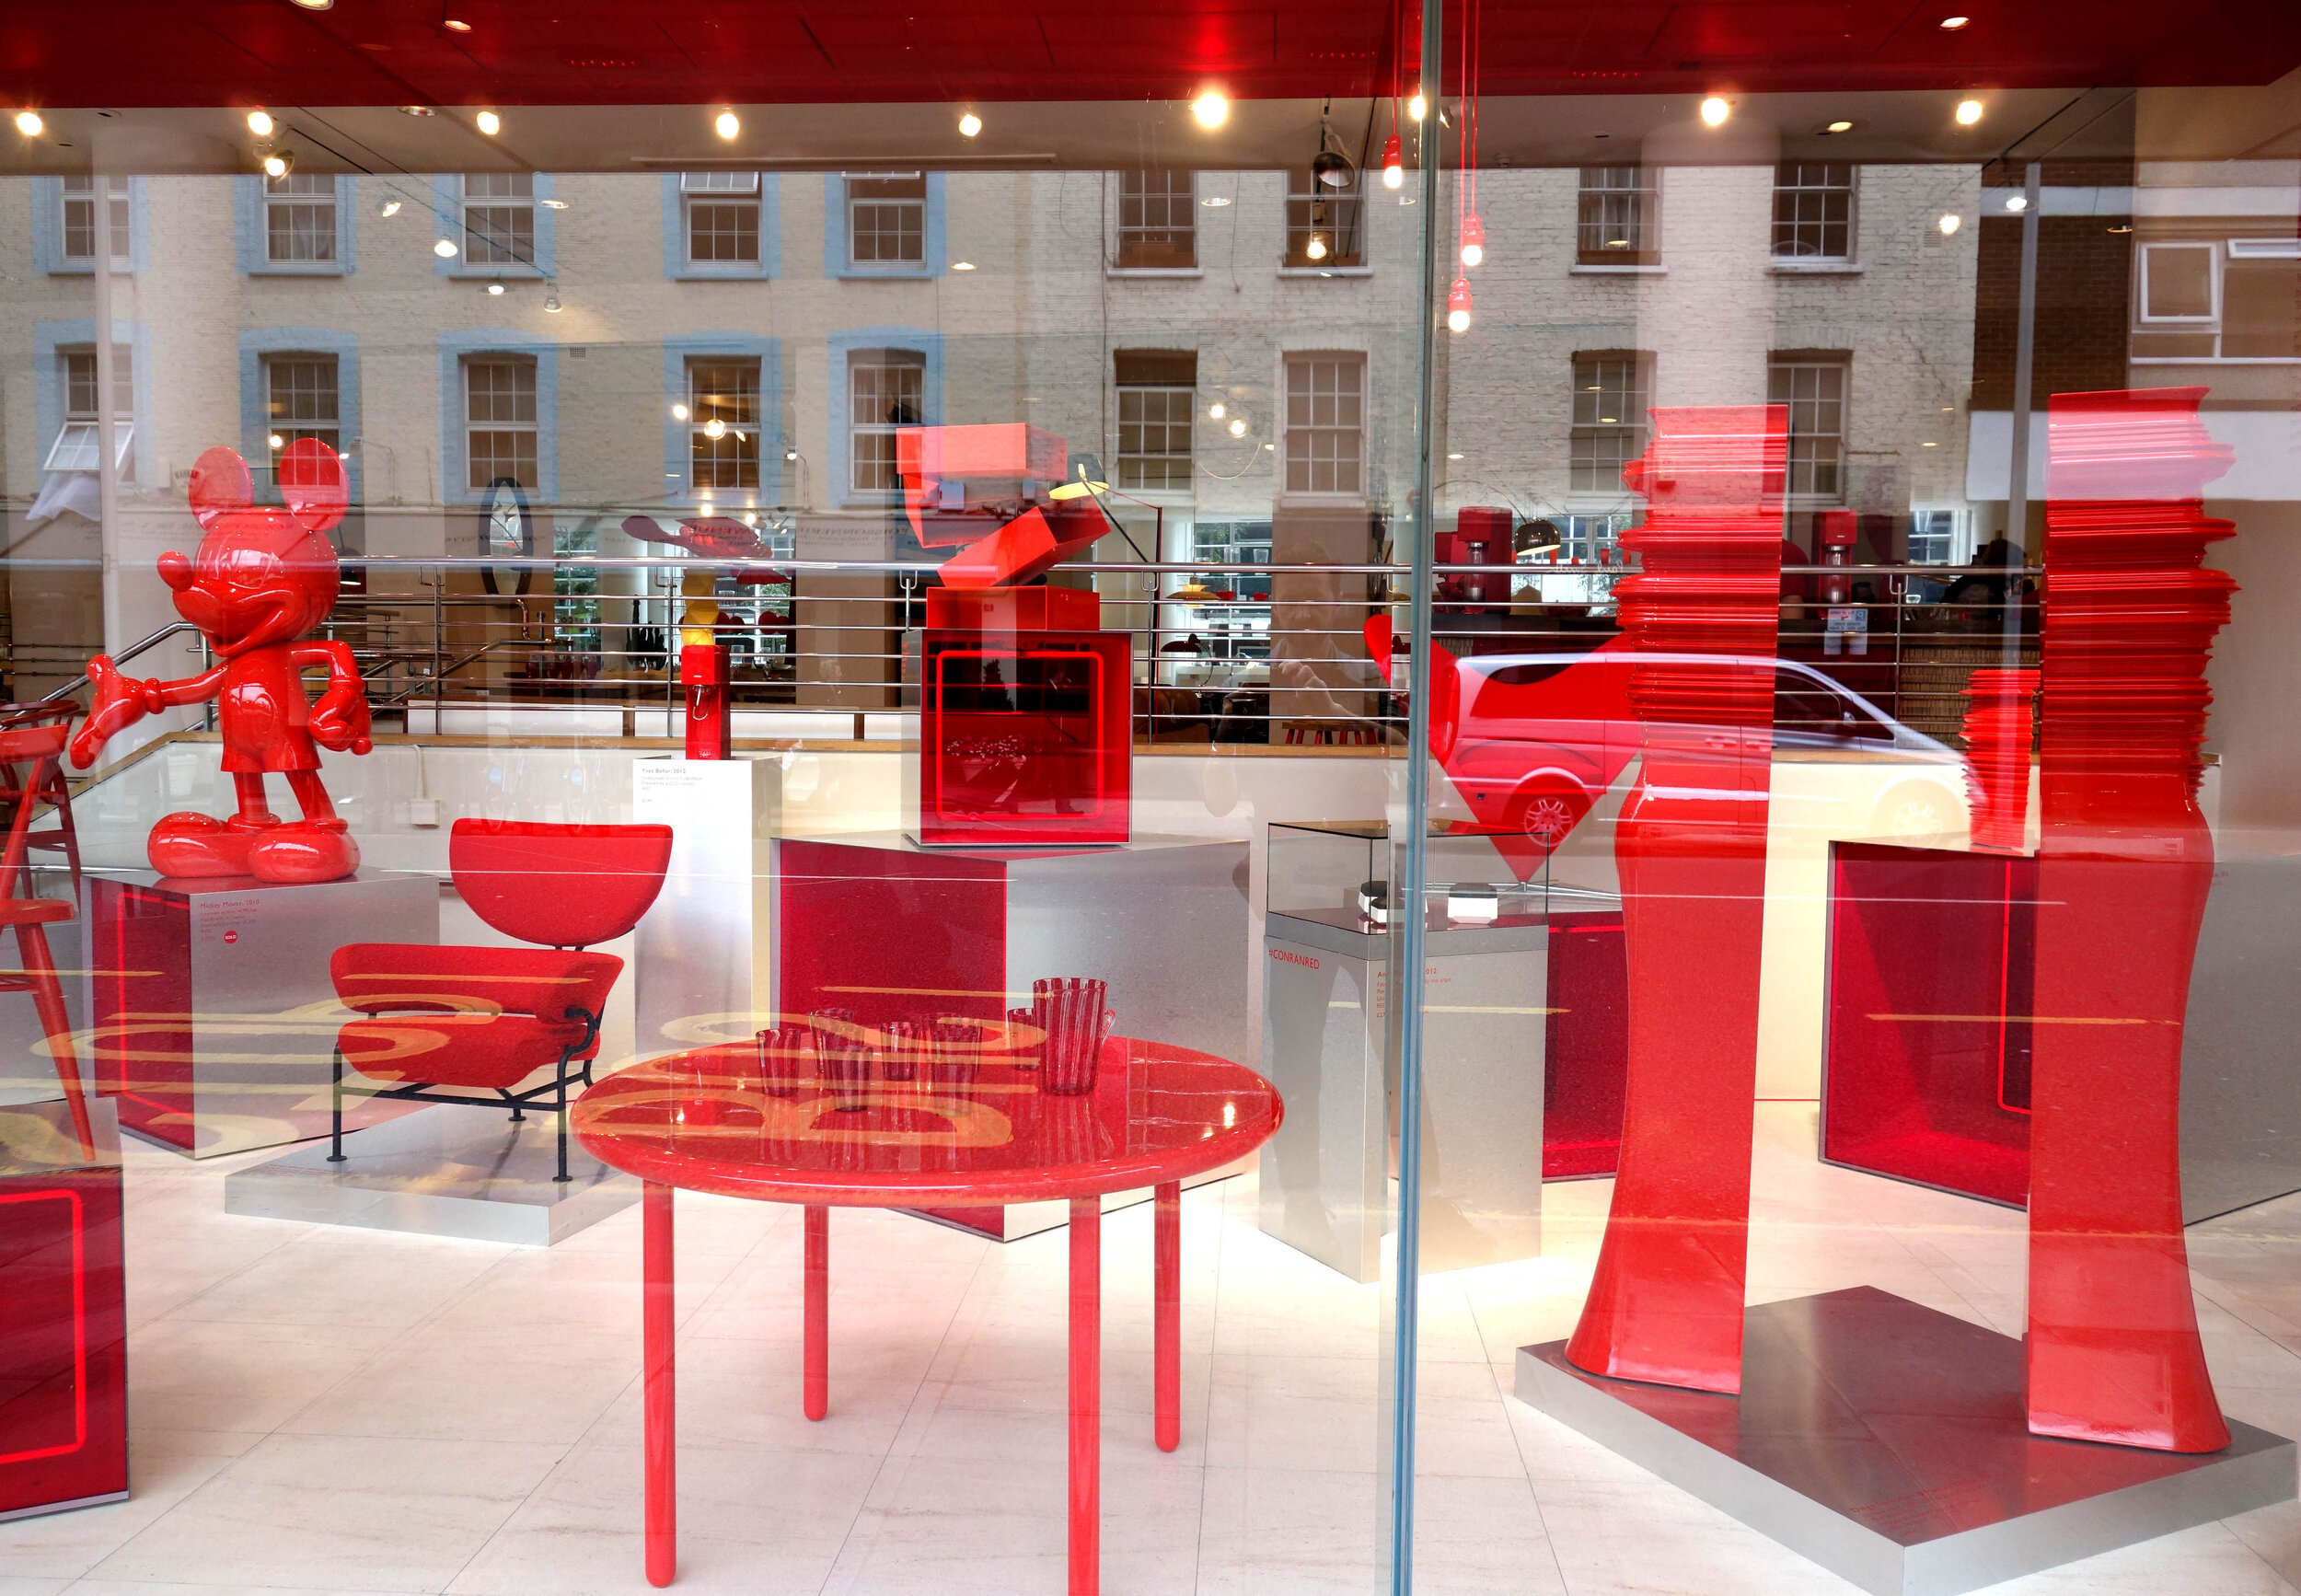 CONRAN SHOP MICHELIN HOUSE RED EXHIBITION TO MARK SILVER JUBILEE